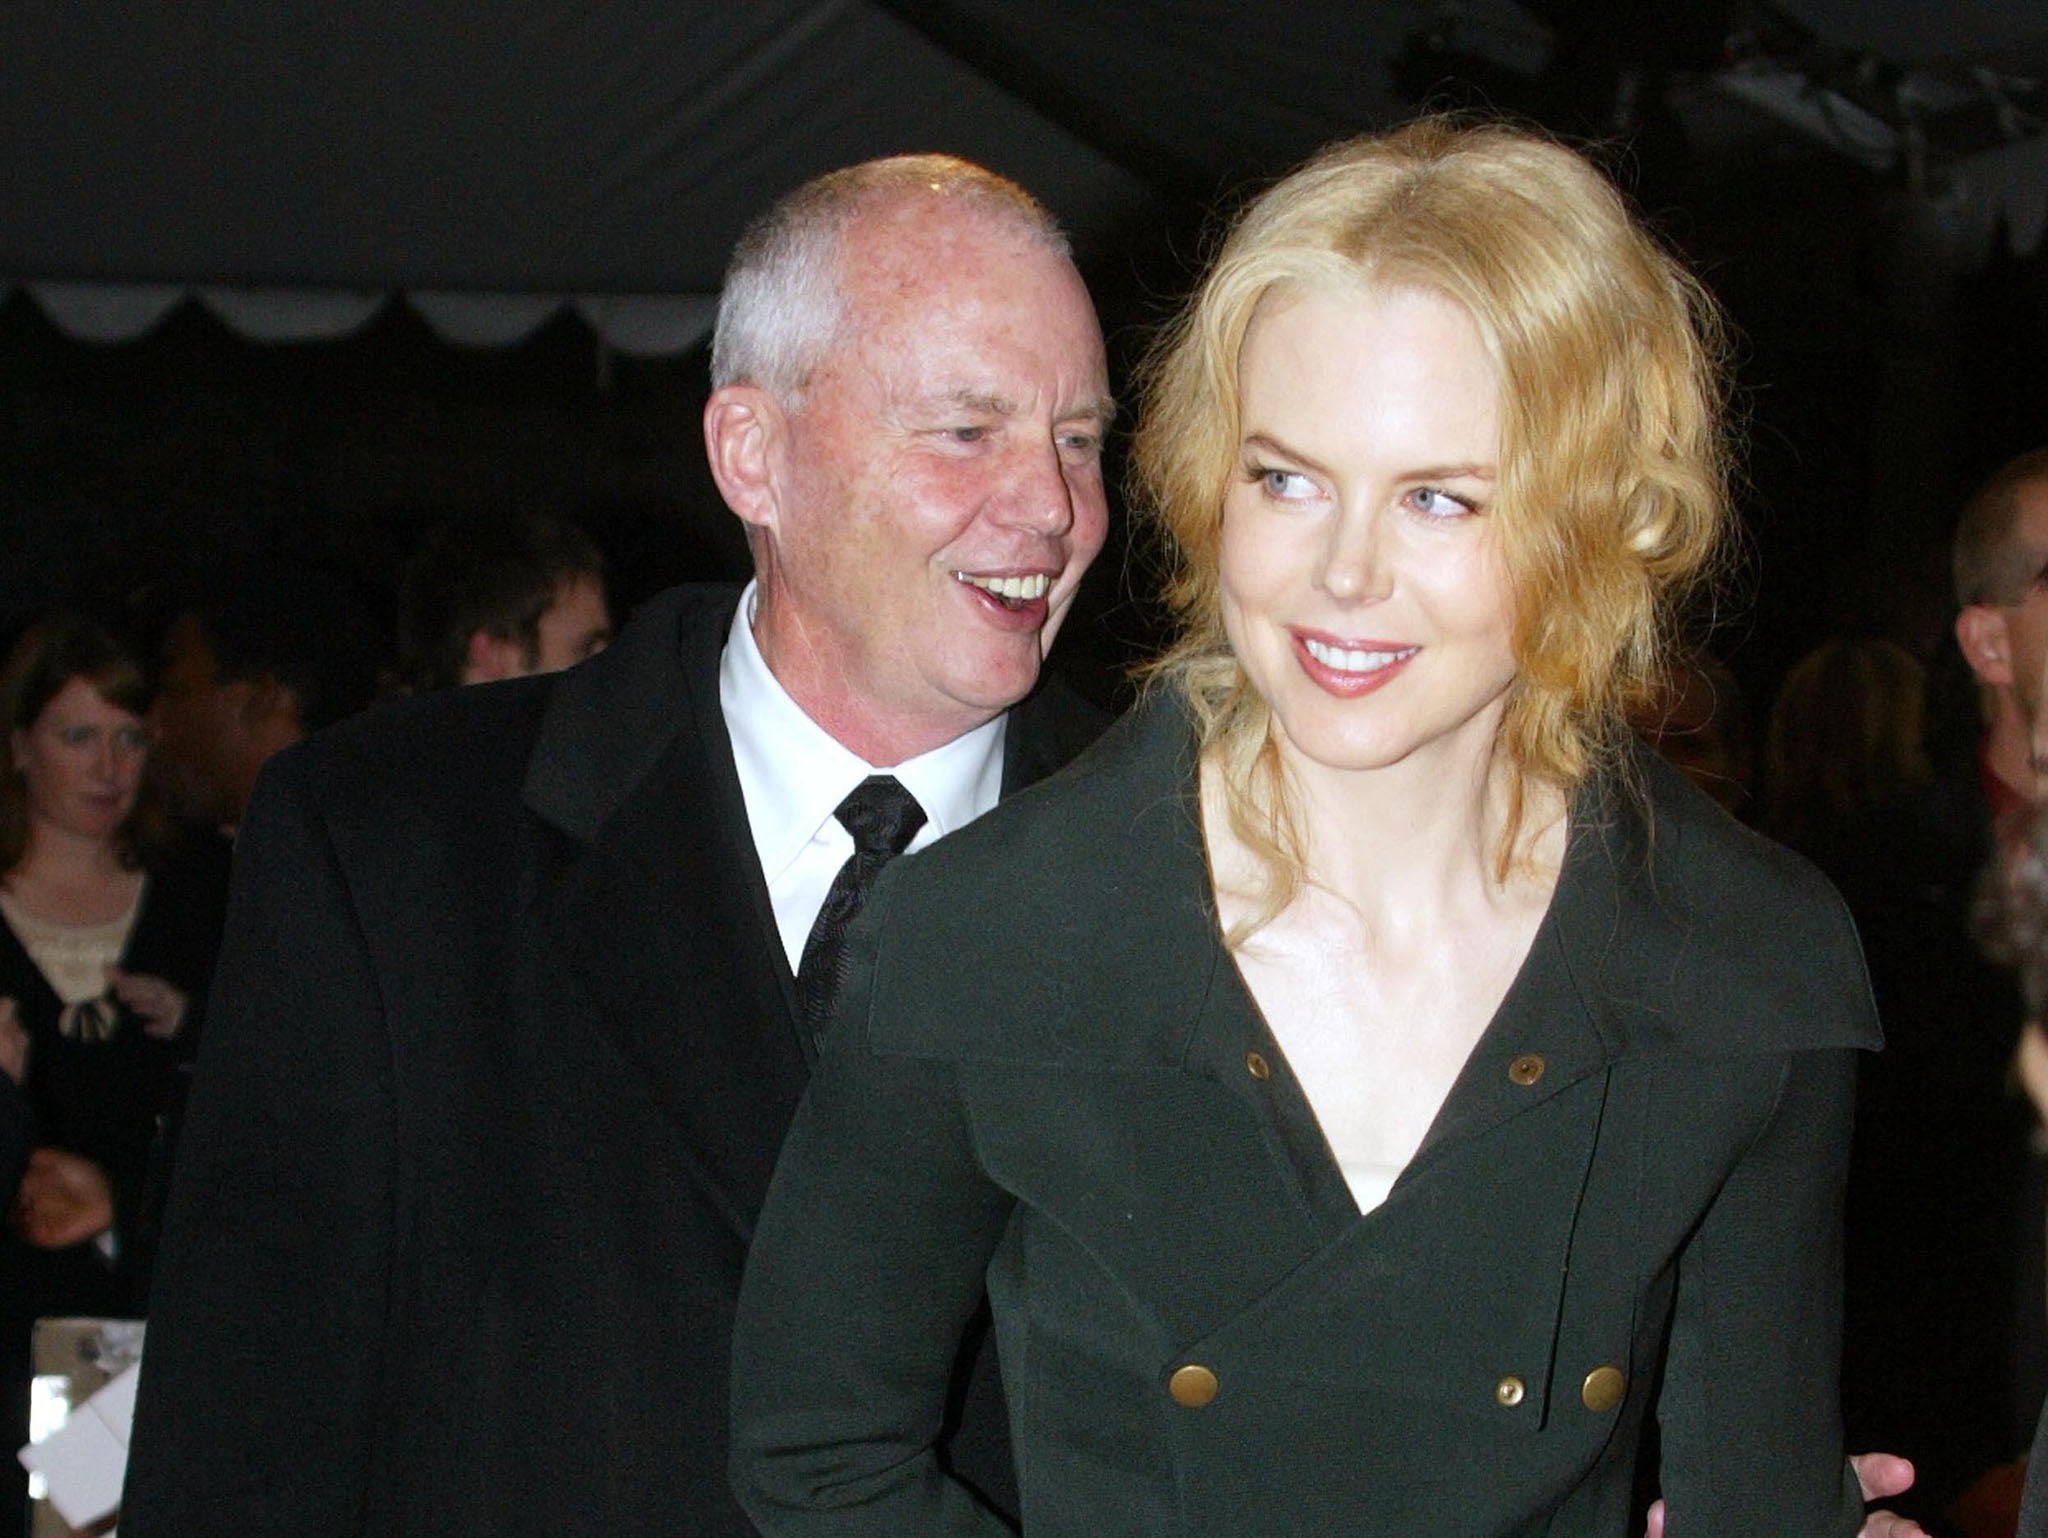 Dr Antony Kidman and his daughter Nicole Kidman on the red carpet in 2005